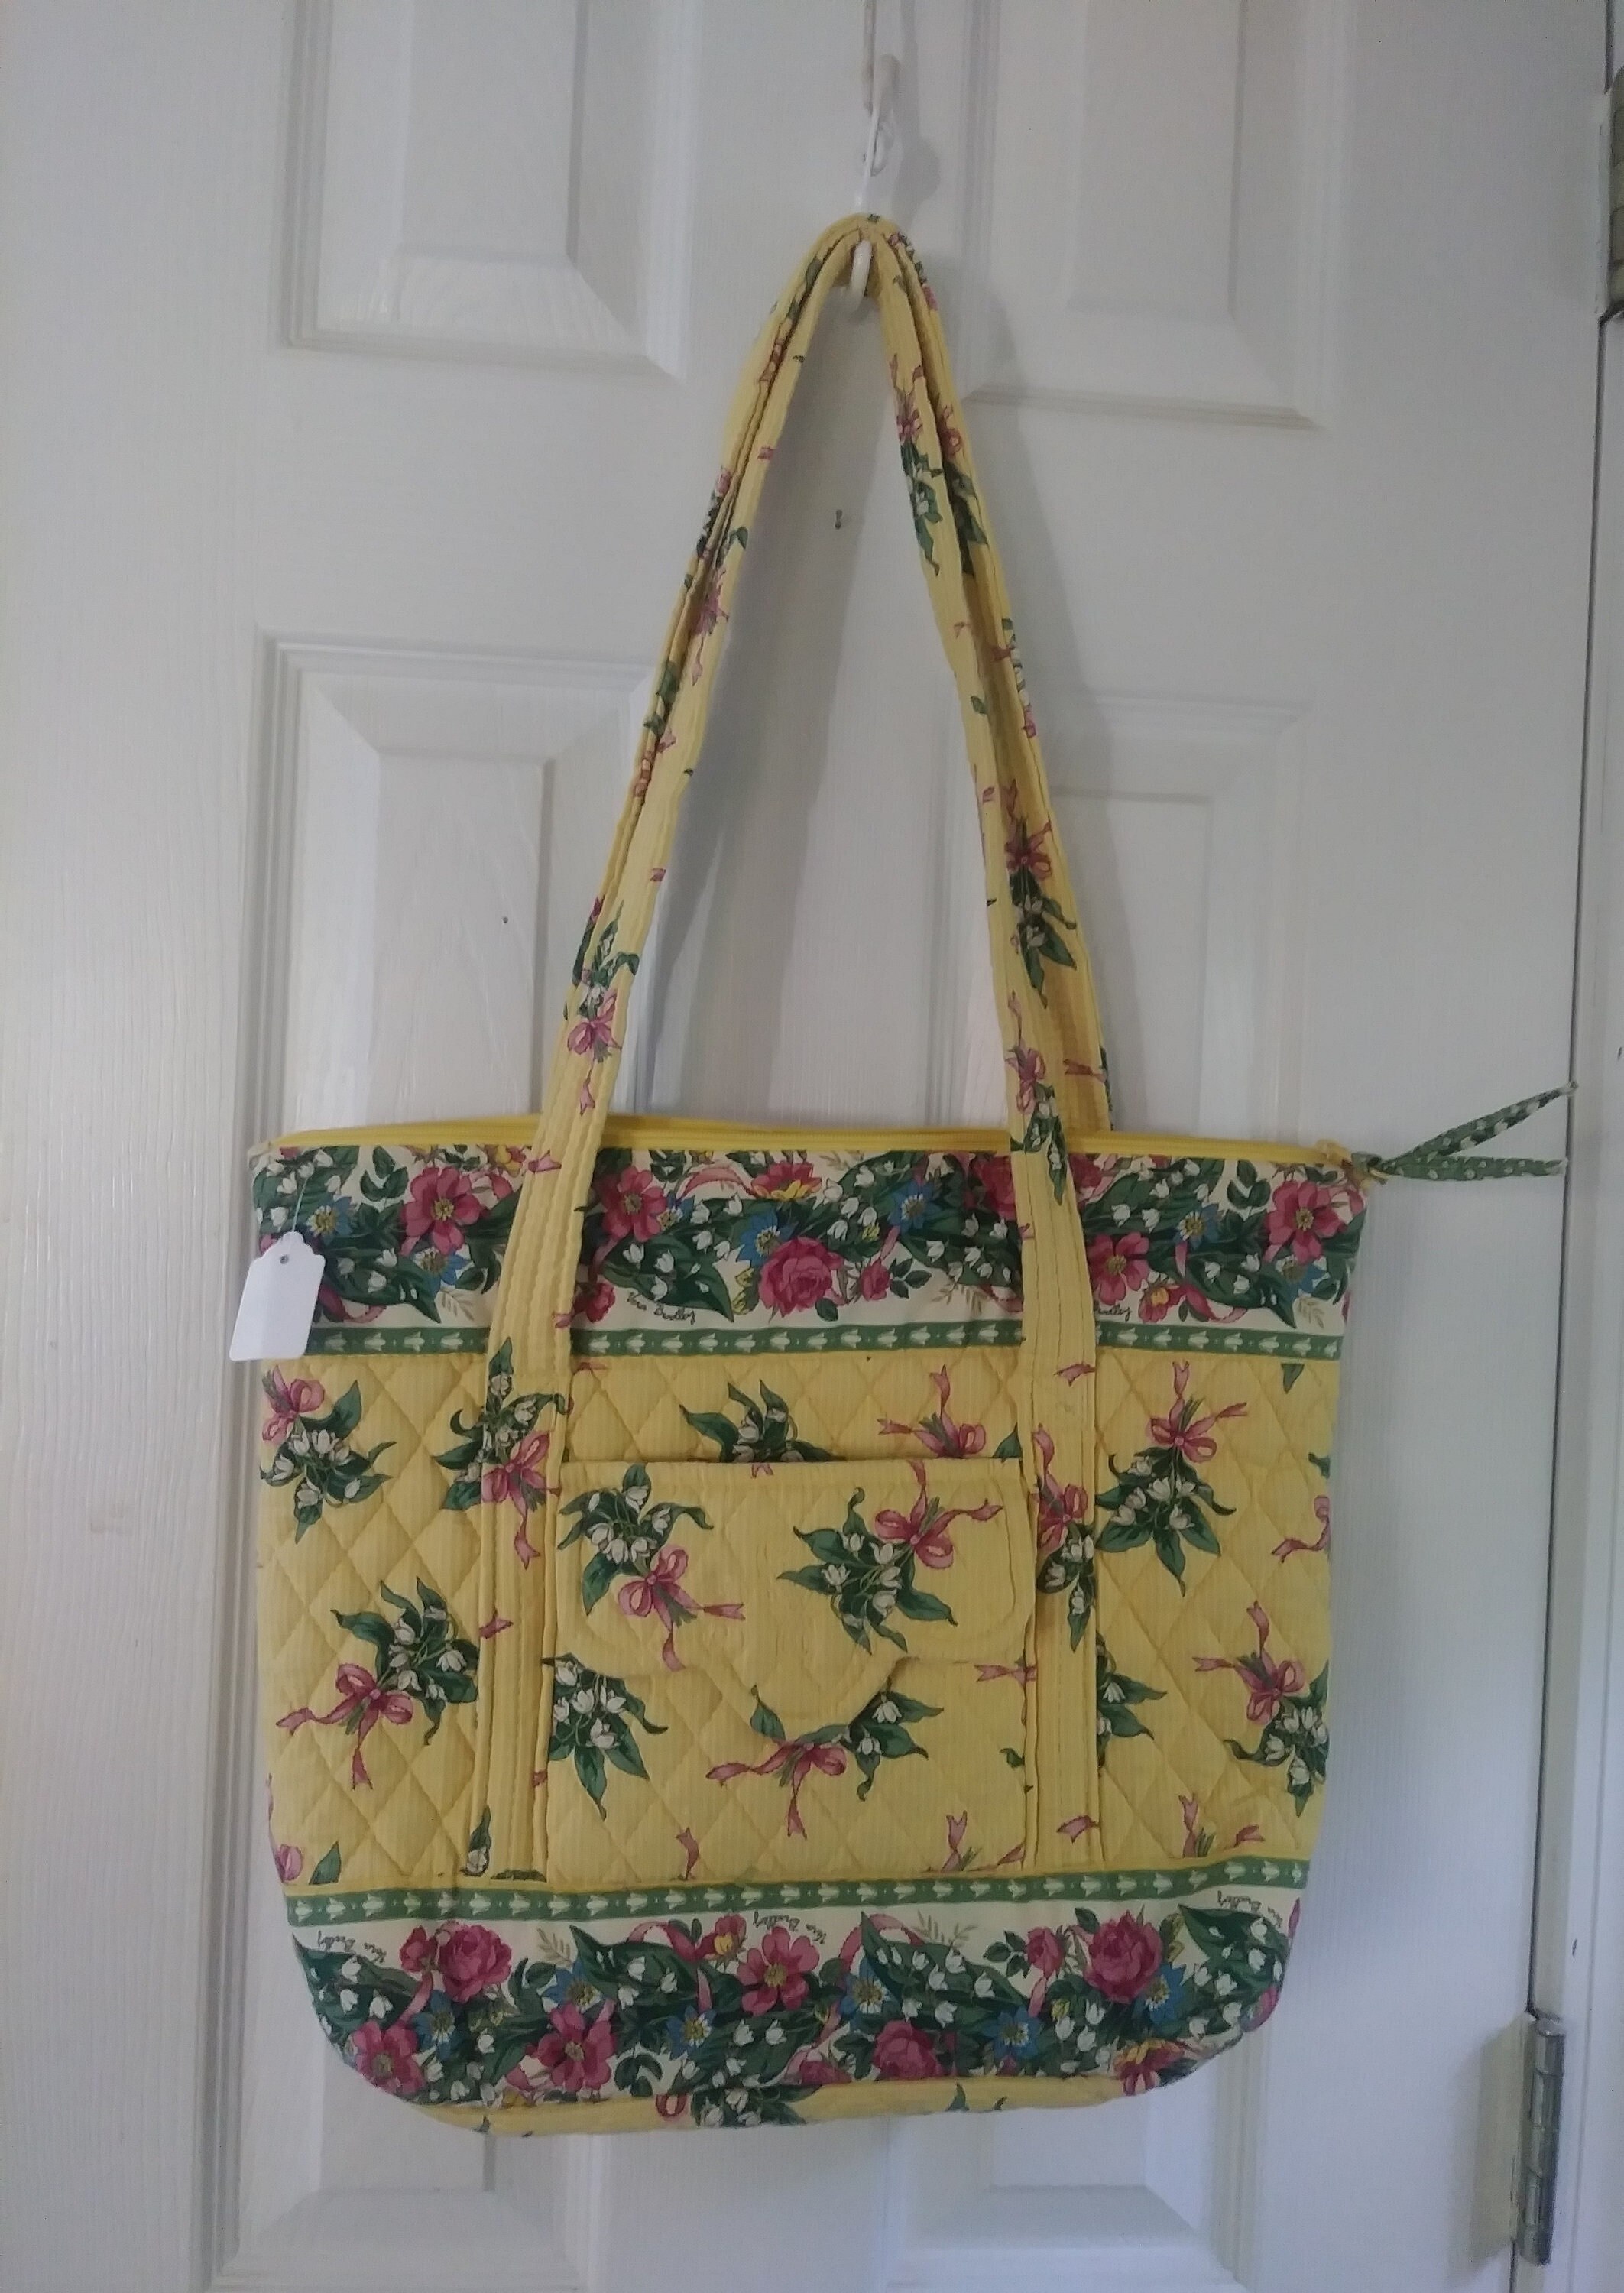 Vera Bradley Tote Toggle Shoulder Bag Purse in Retired Yellow Hope Pattern